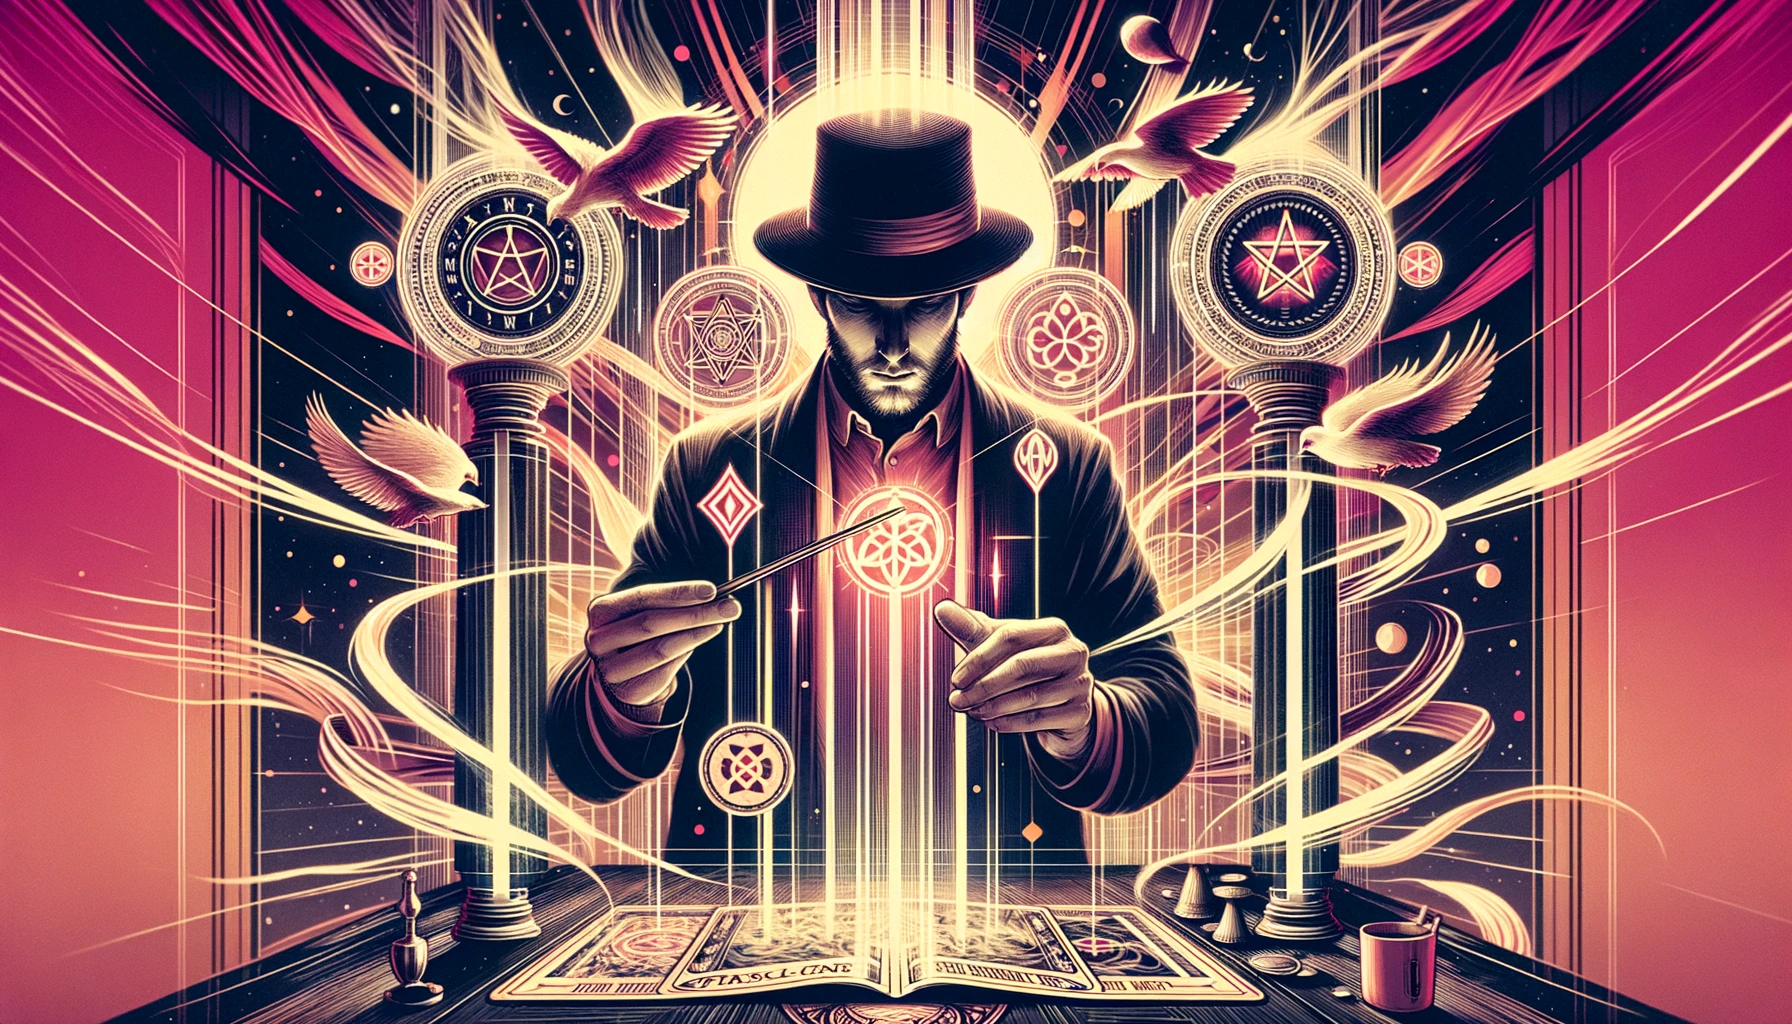 "An illustration representing the concept of manifestation and control, featuring 'The Magician' Tarot card with a figure holding a wand and pointing towards the sky, surrounded by symbols of the elements and various tools on a table, conveying the aspiration to harness skills and resources to achieve specific goals or dreams."